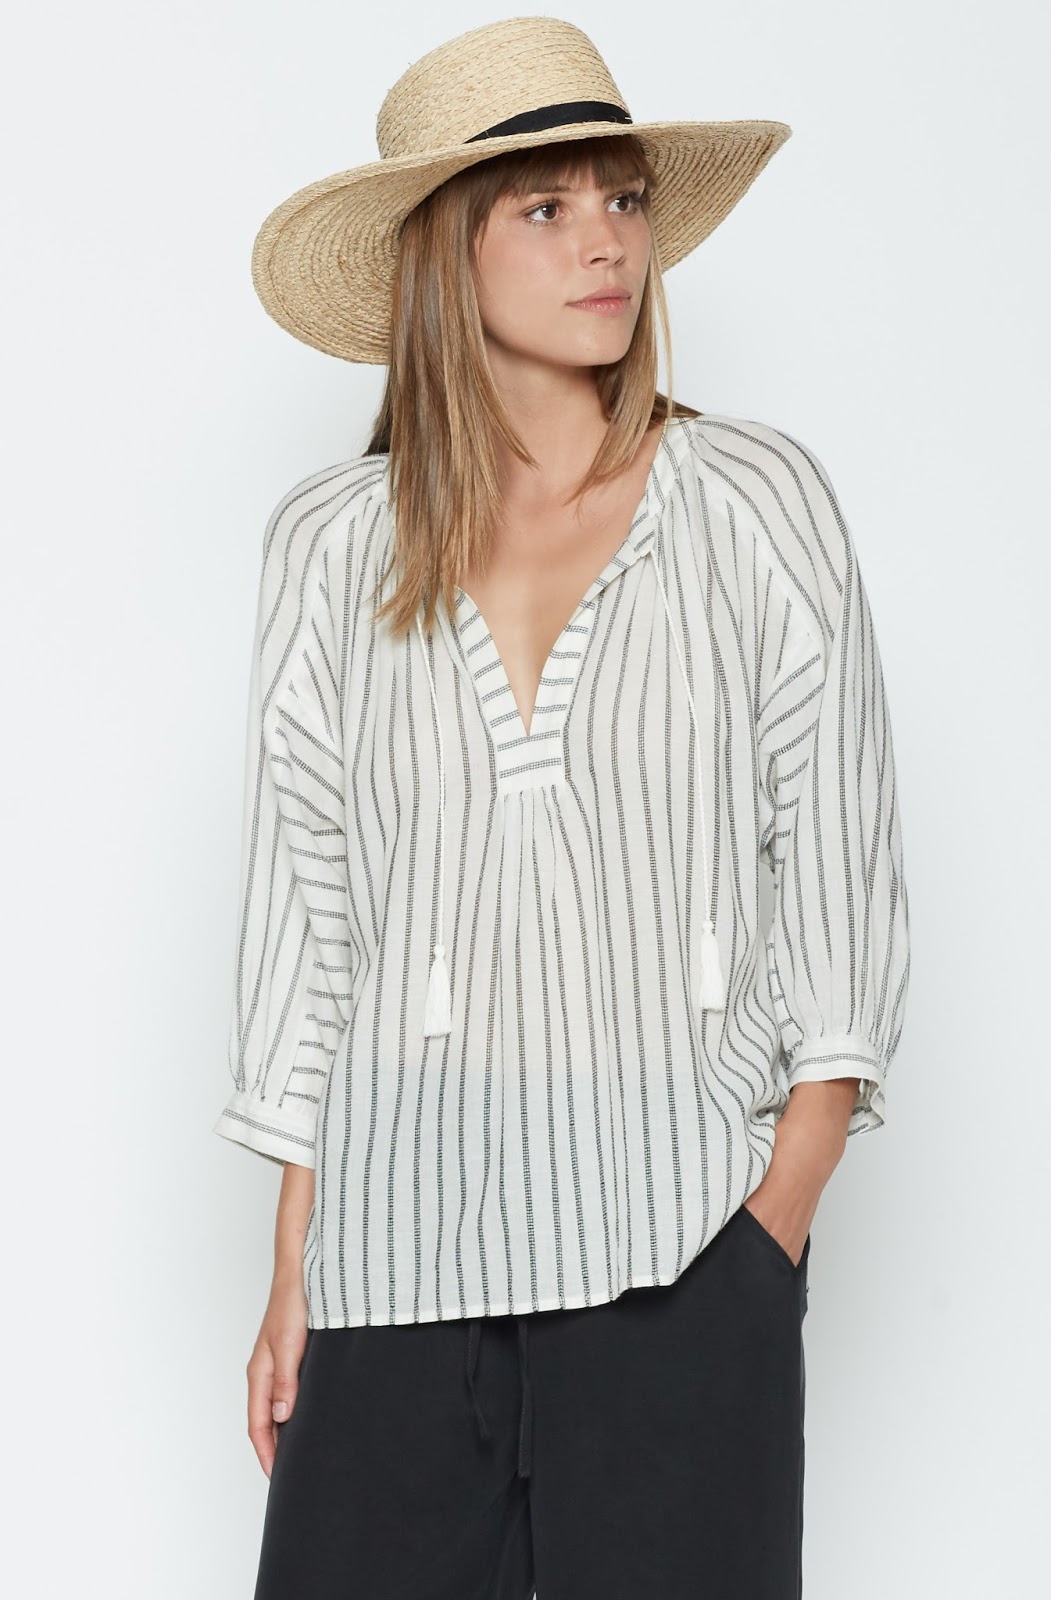 New Markdowns: Joie, GiGi New York, Bella Dahl, AG Jeans, and More ...